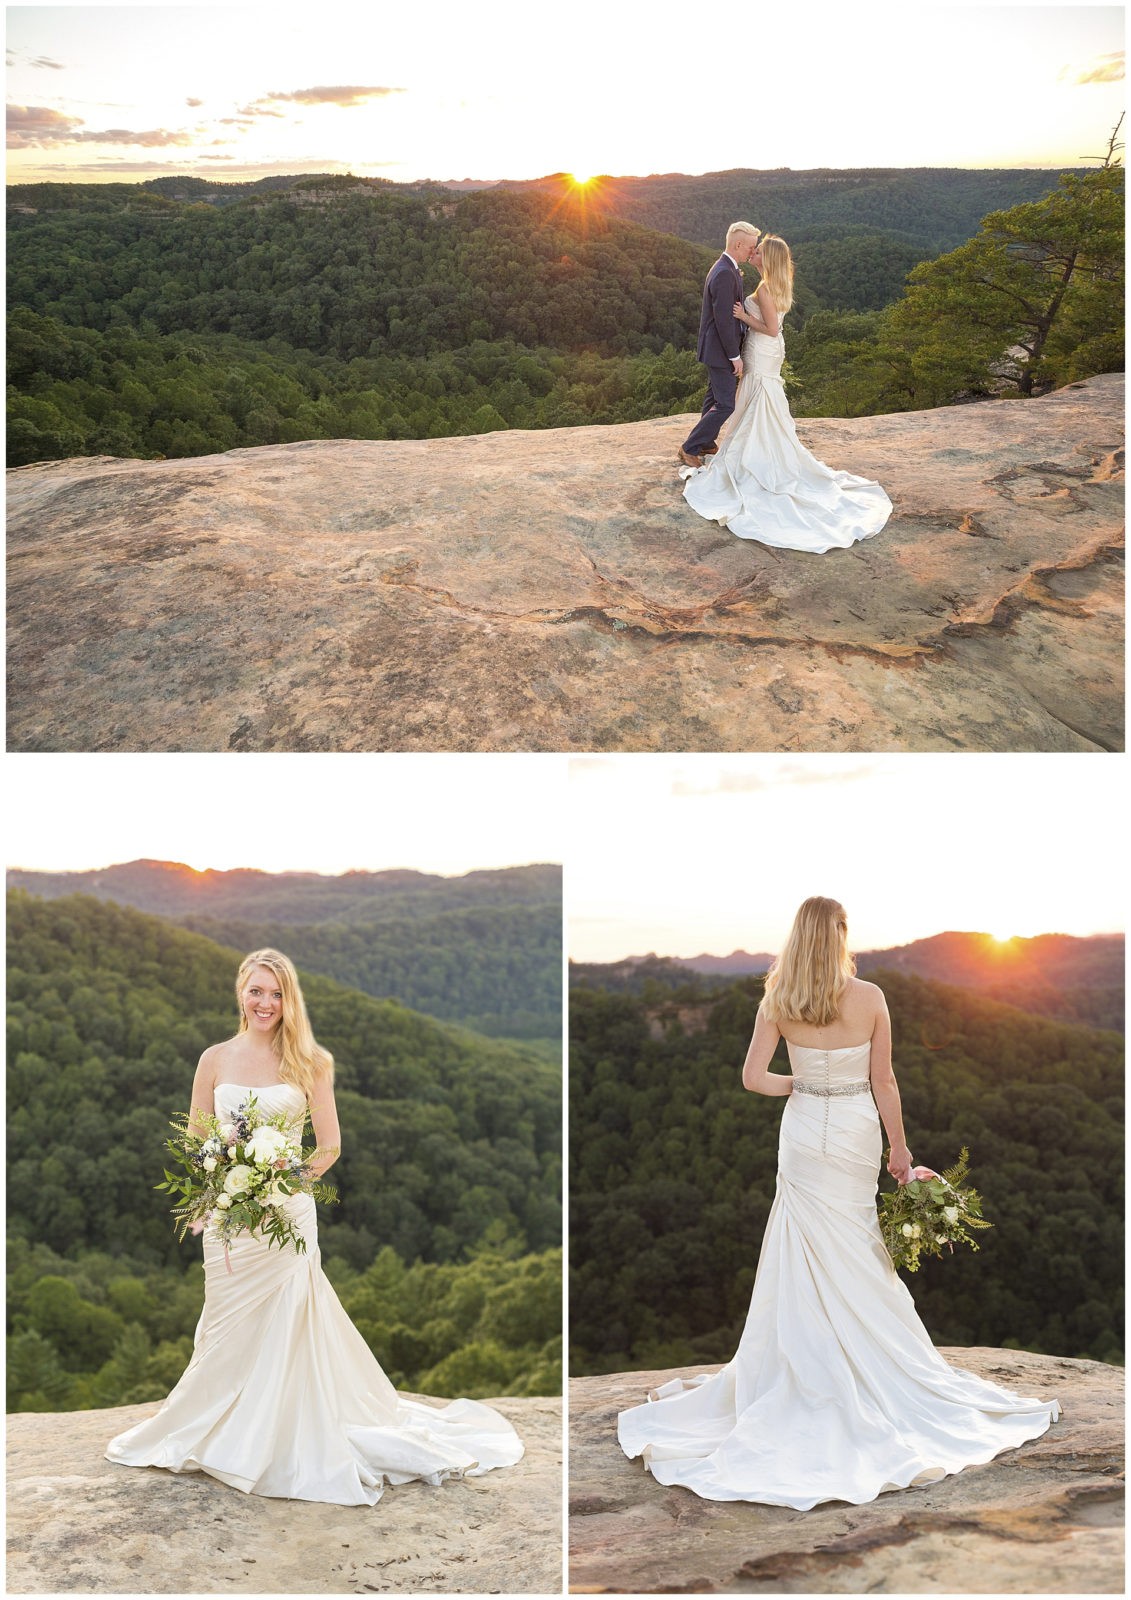 Neal & Samantha's Red River Gorge Session on Auxier Ridge on August 21, 2016. Photos by: Kevin and Anna Photography www.kevinandannaweddings.com